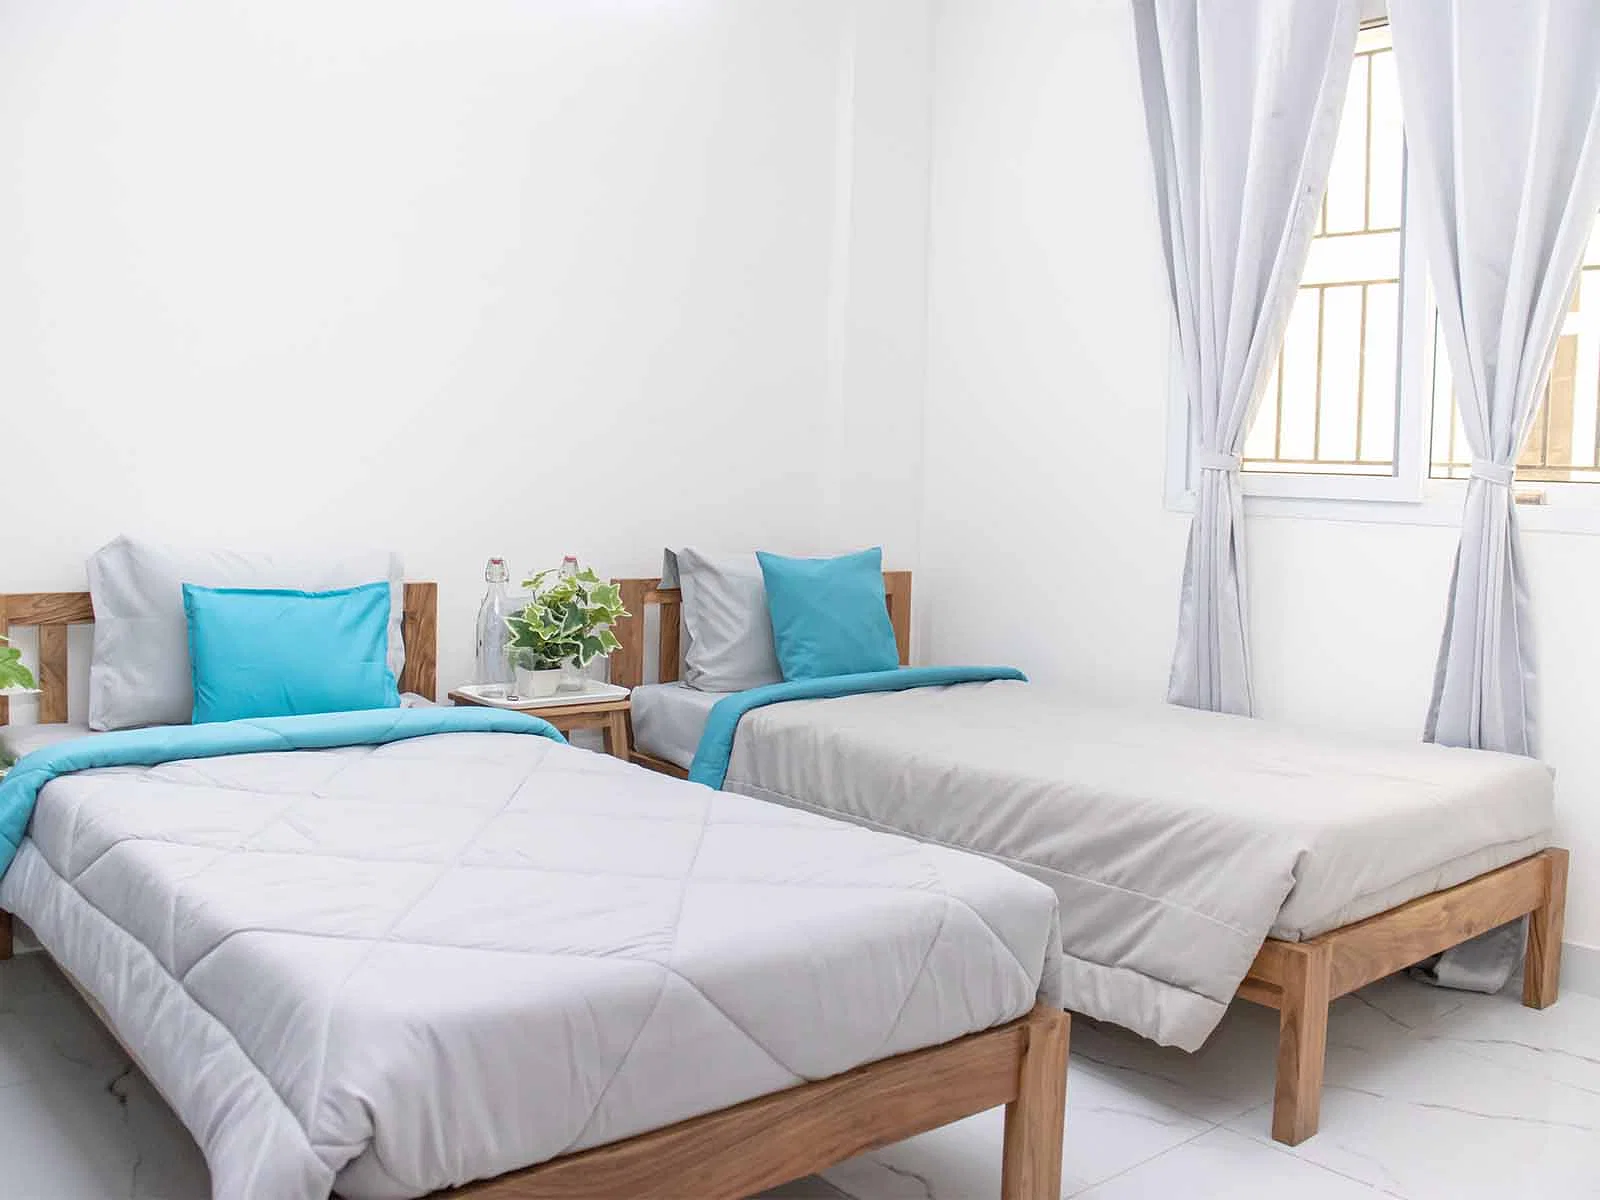 Fully furnished single/sharing rooms for rent in Manyata with no brokerage-apply fast-Zolo Remington